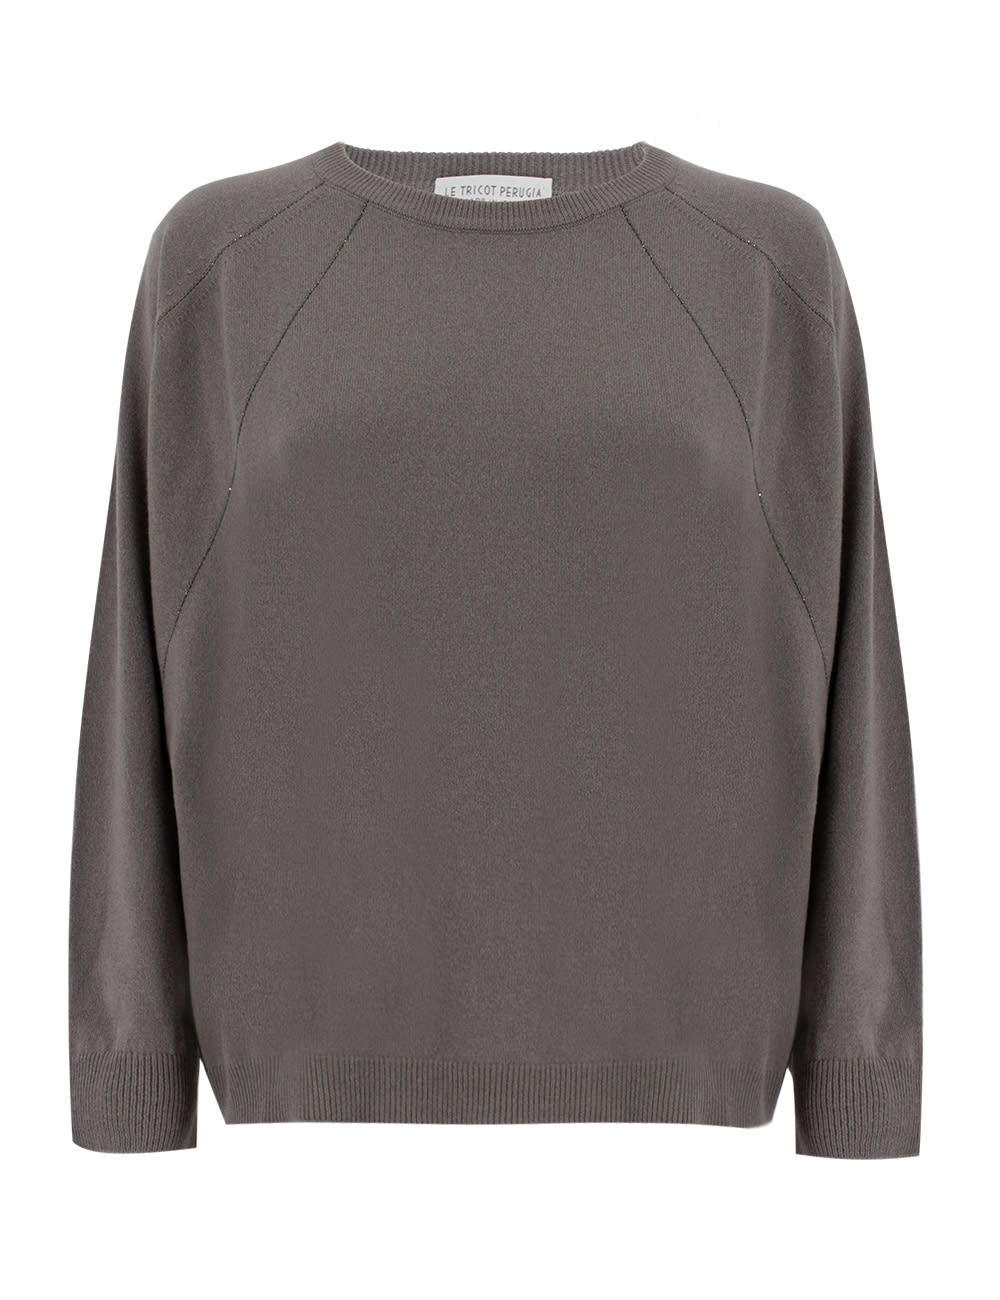 Shop Le Tricot Perugia Sweater In Middle Grey